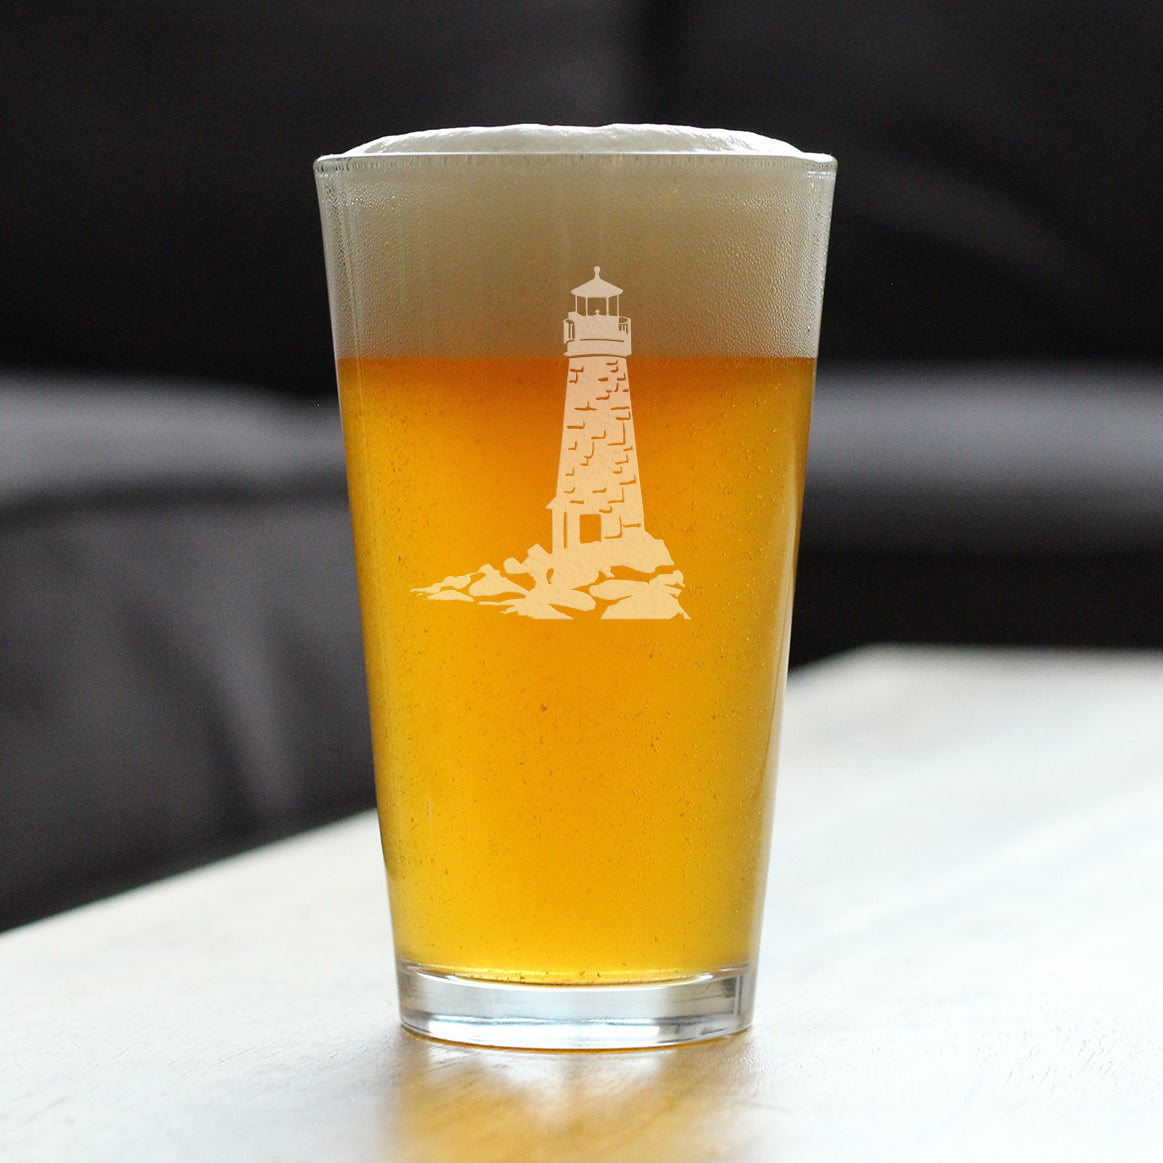 Lighthouse Pint Glass for Beer - Nautical Themed Decor and Gifts for Beach Lovers - 16 oz Glasses